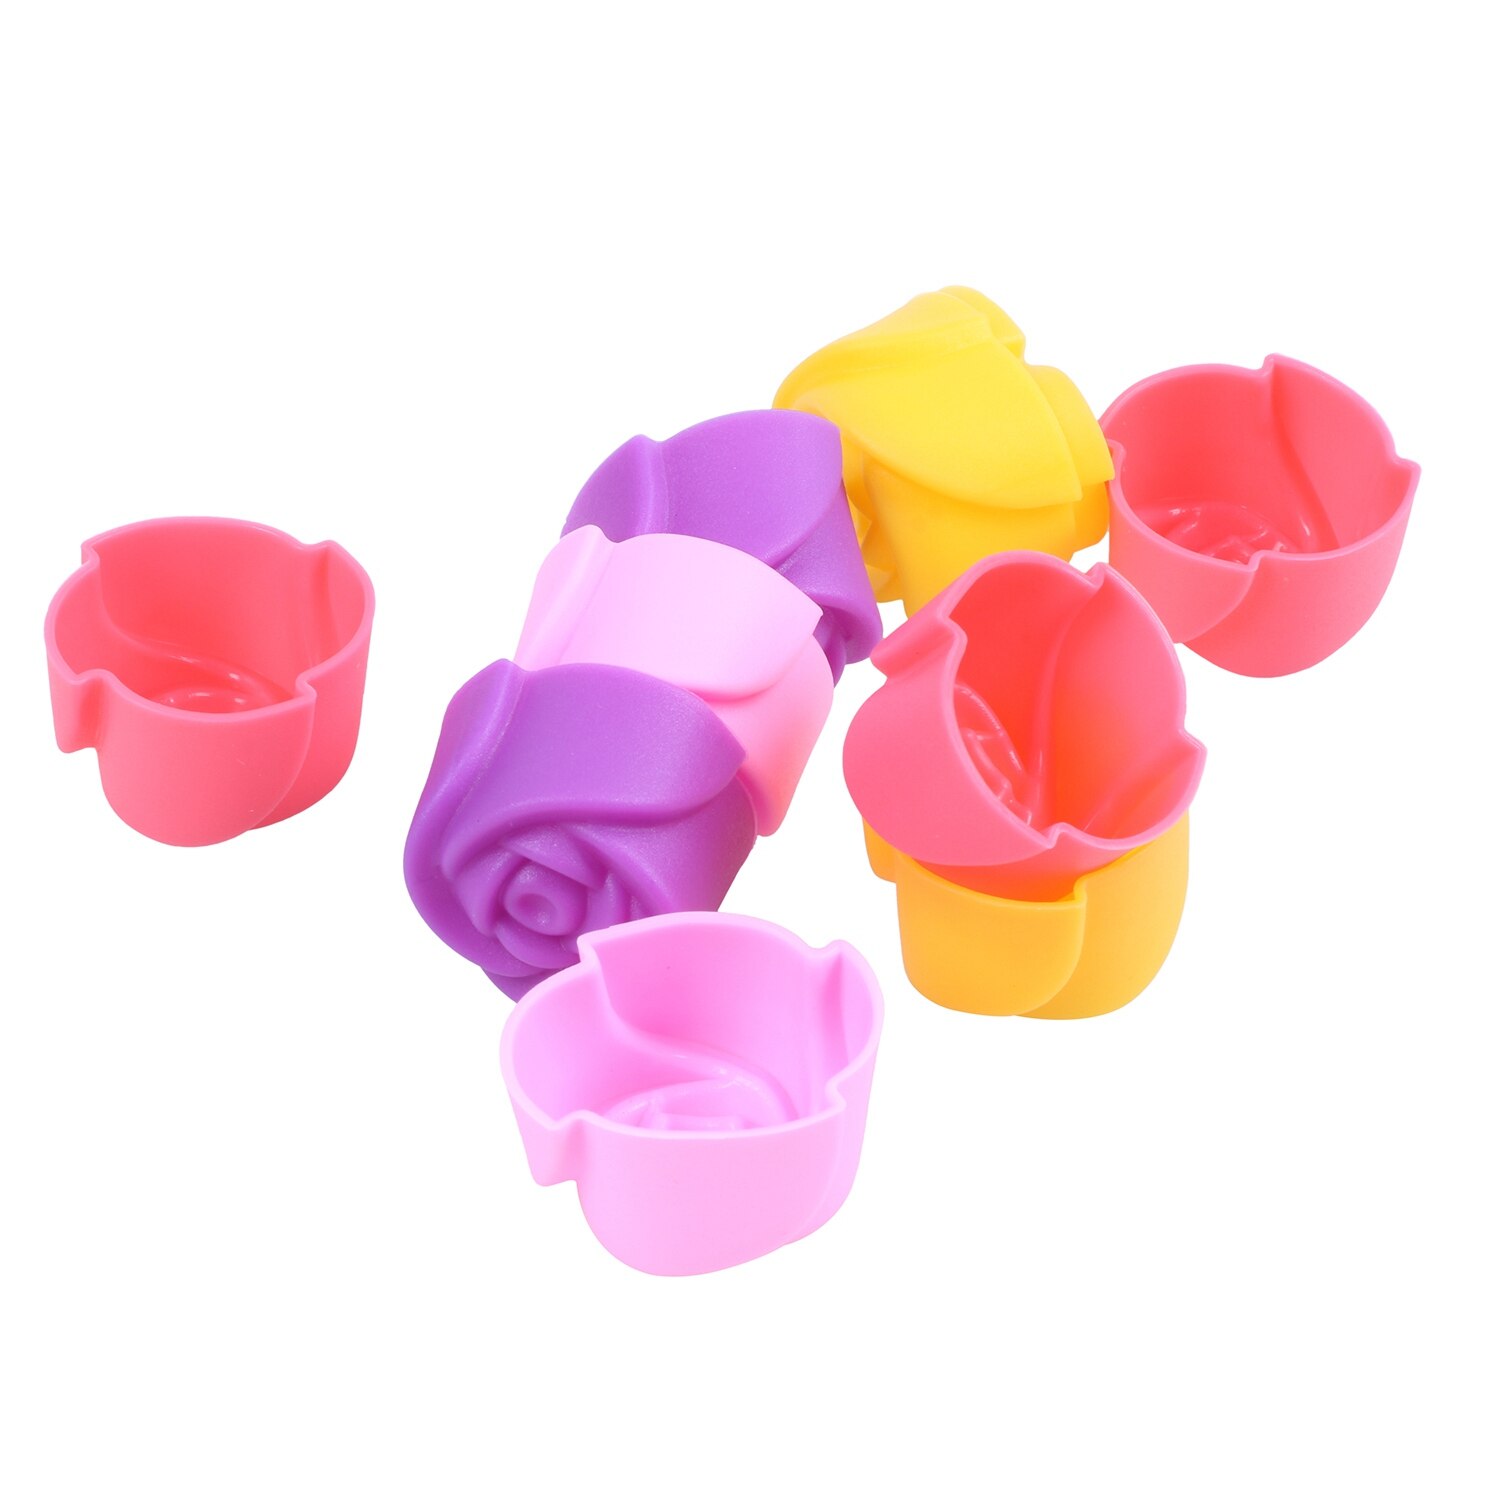 10x Silicone Rose Muffin Cookie Cup Cake Bakvorm Chocolade Jelly Maker Mould